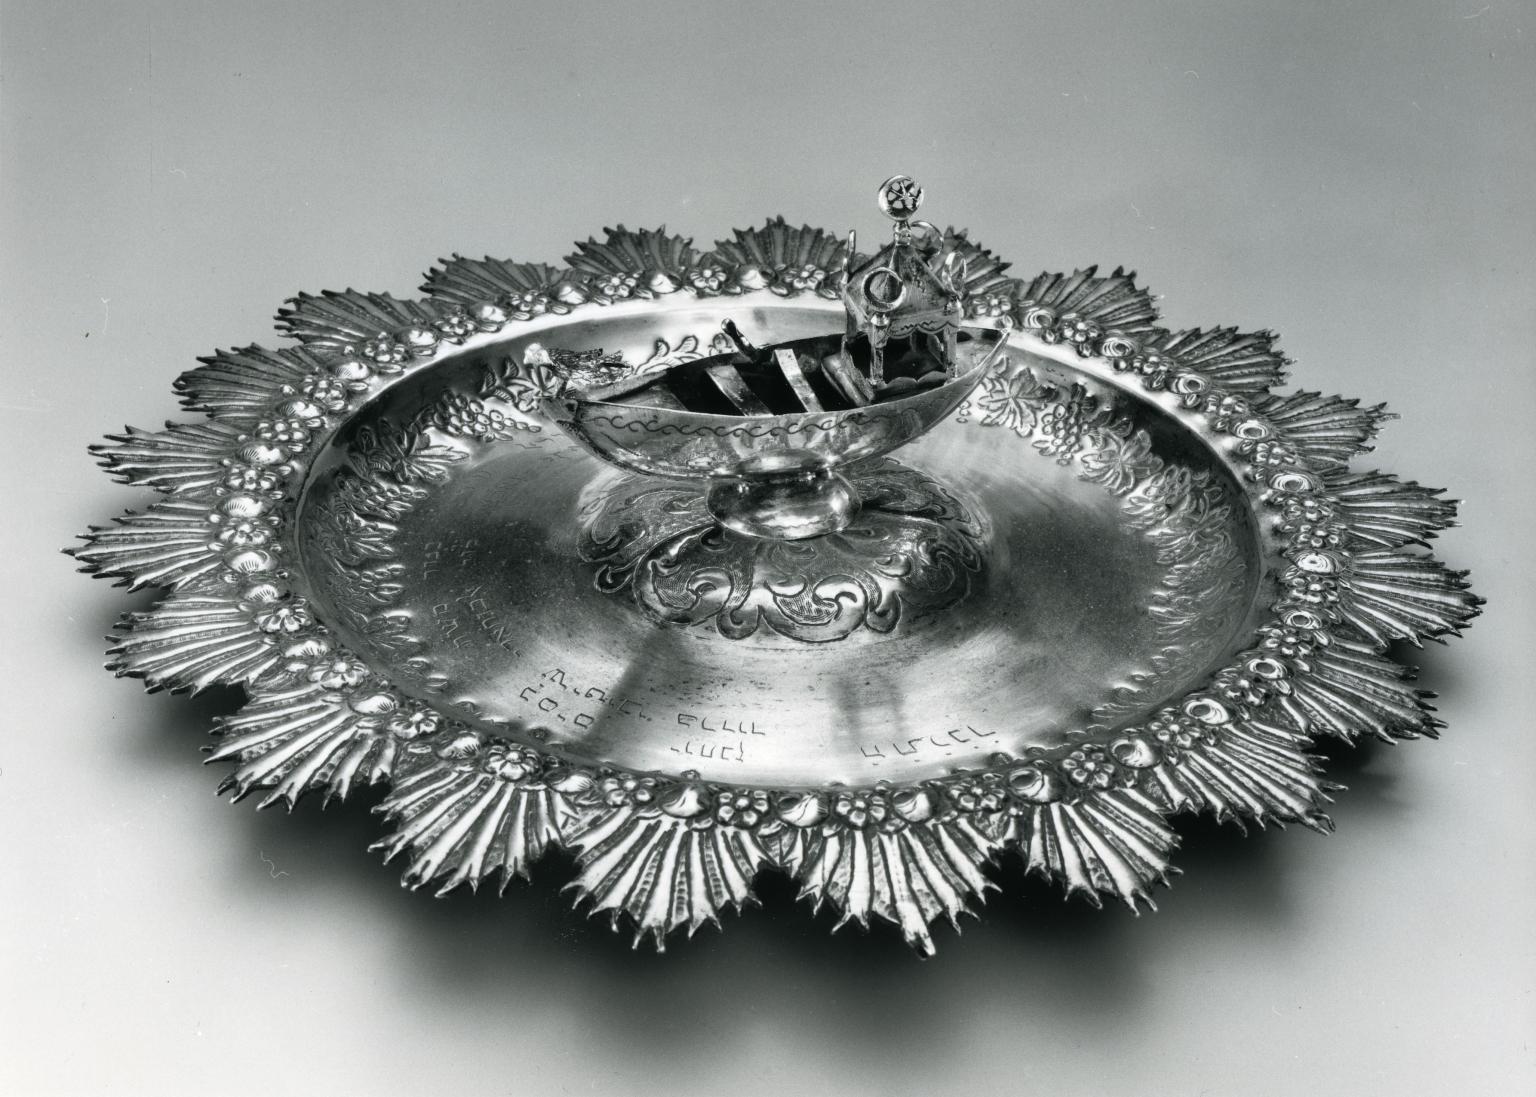 Silver plate featuring a boat in the center. 